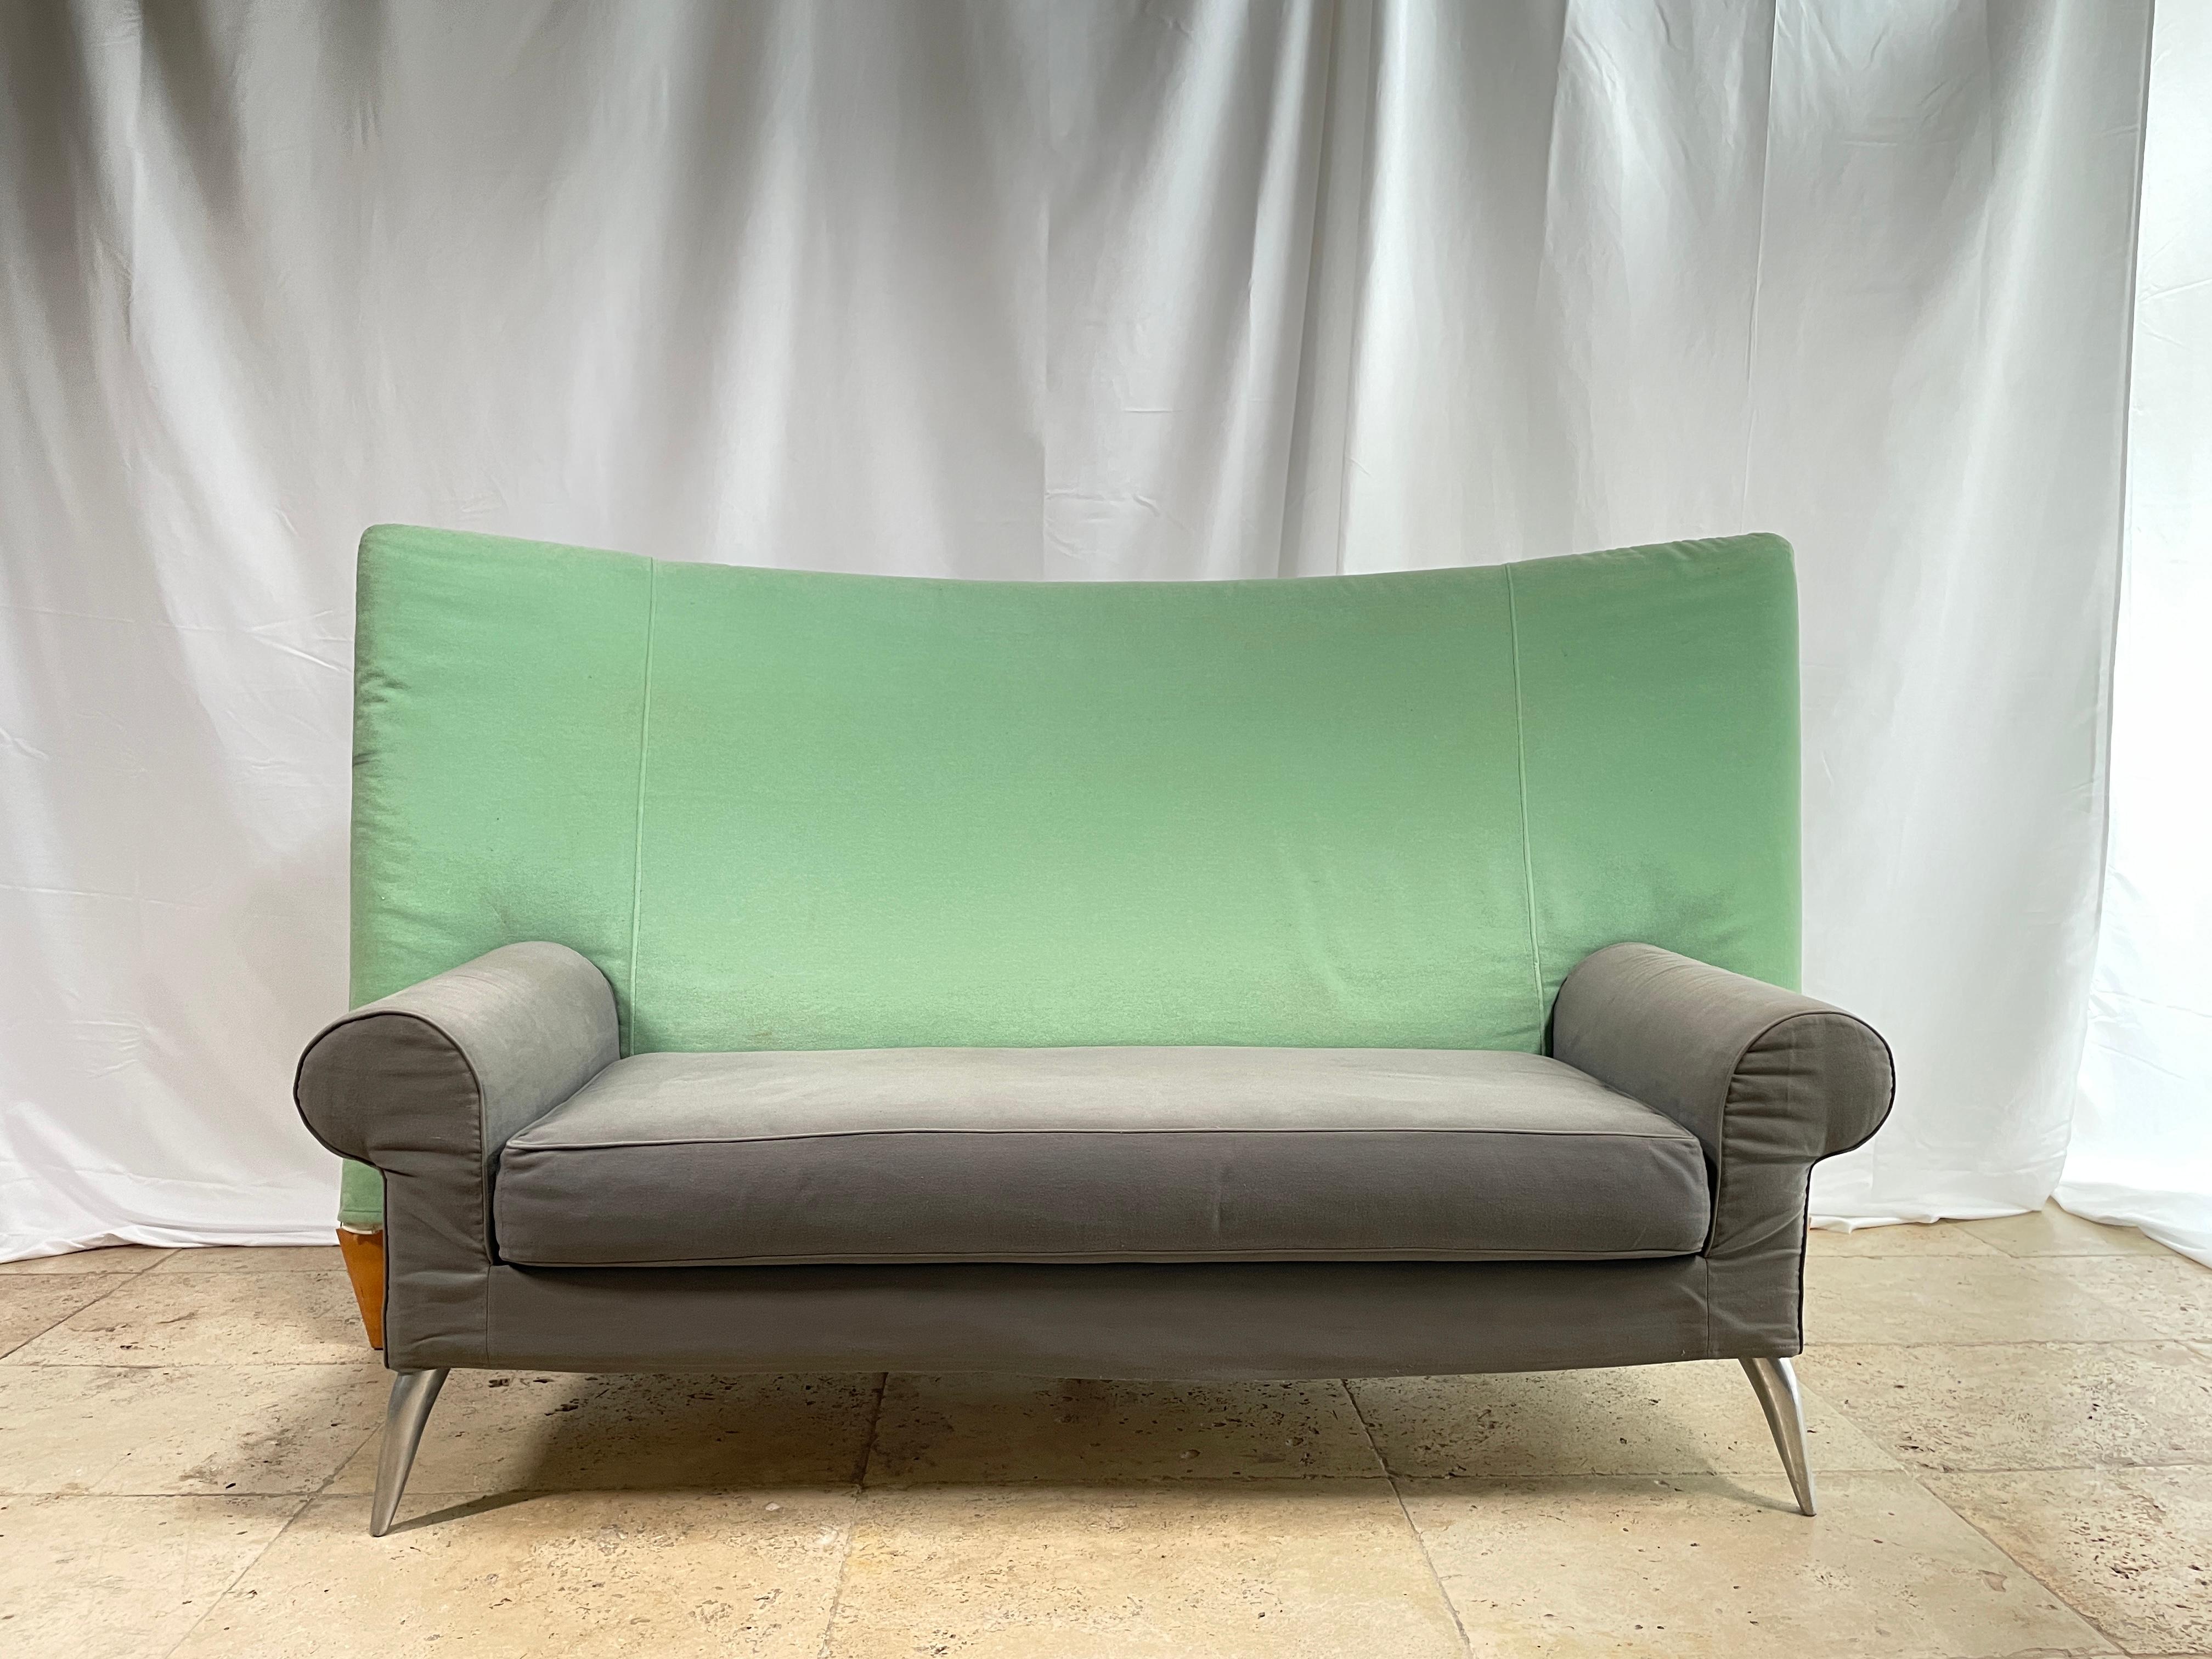 Philippe Starck (born 1949)
 Royalton model sofa with legs in polished aluminium cast iron at the front and solid beech at the back. Steel frame with foam covered in green and grey cotton canvas.
 Edition: Driade, circa 1988.
 A few traces of use